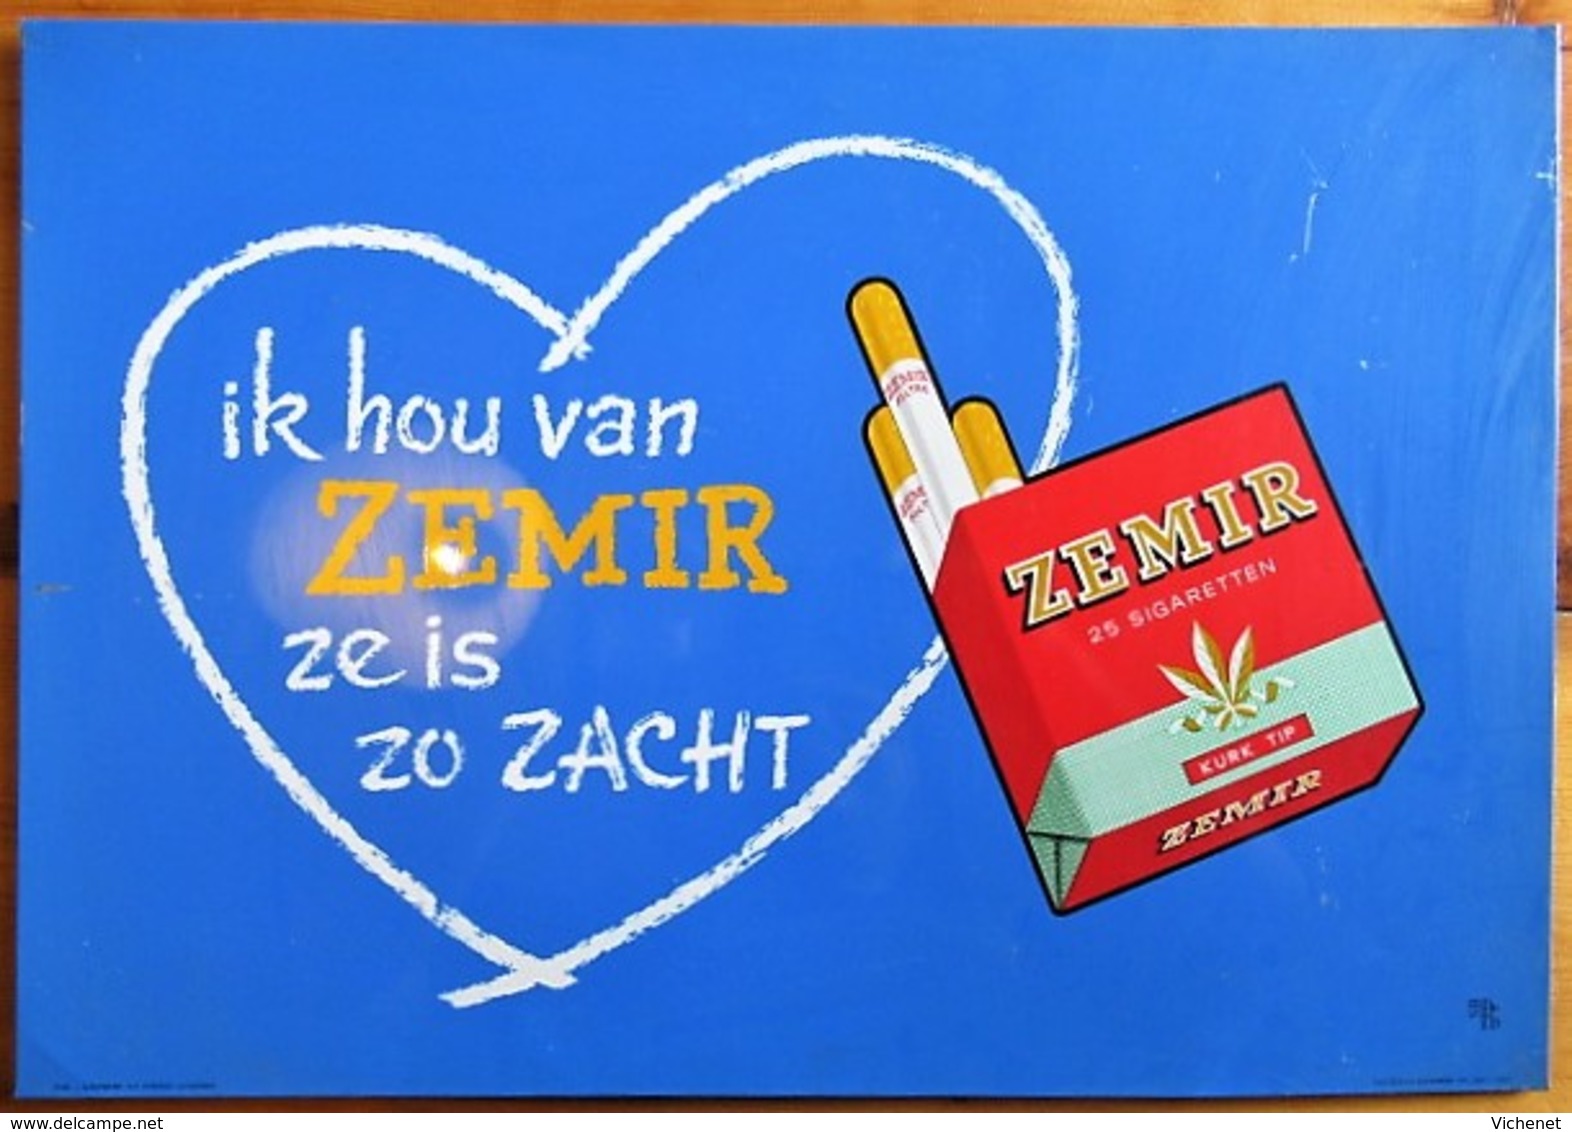 ZEMIR (Cigarettes) - Metal On Cardboard To Put In Easel - 500 X 350 Mm - Advertising Items